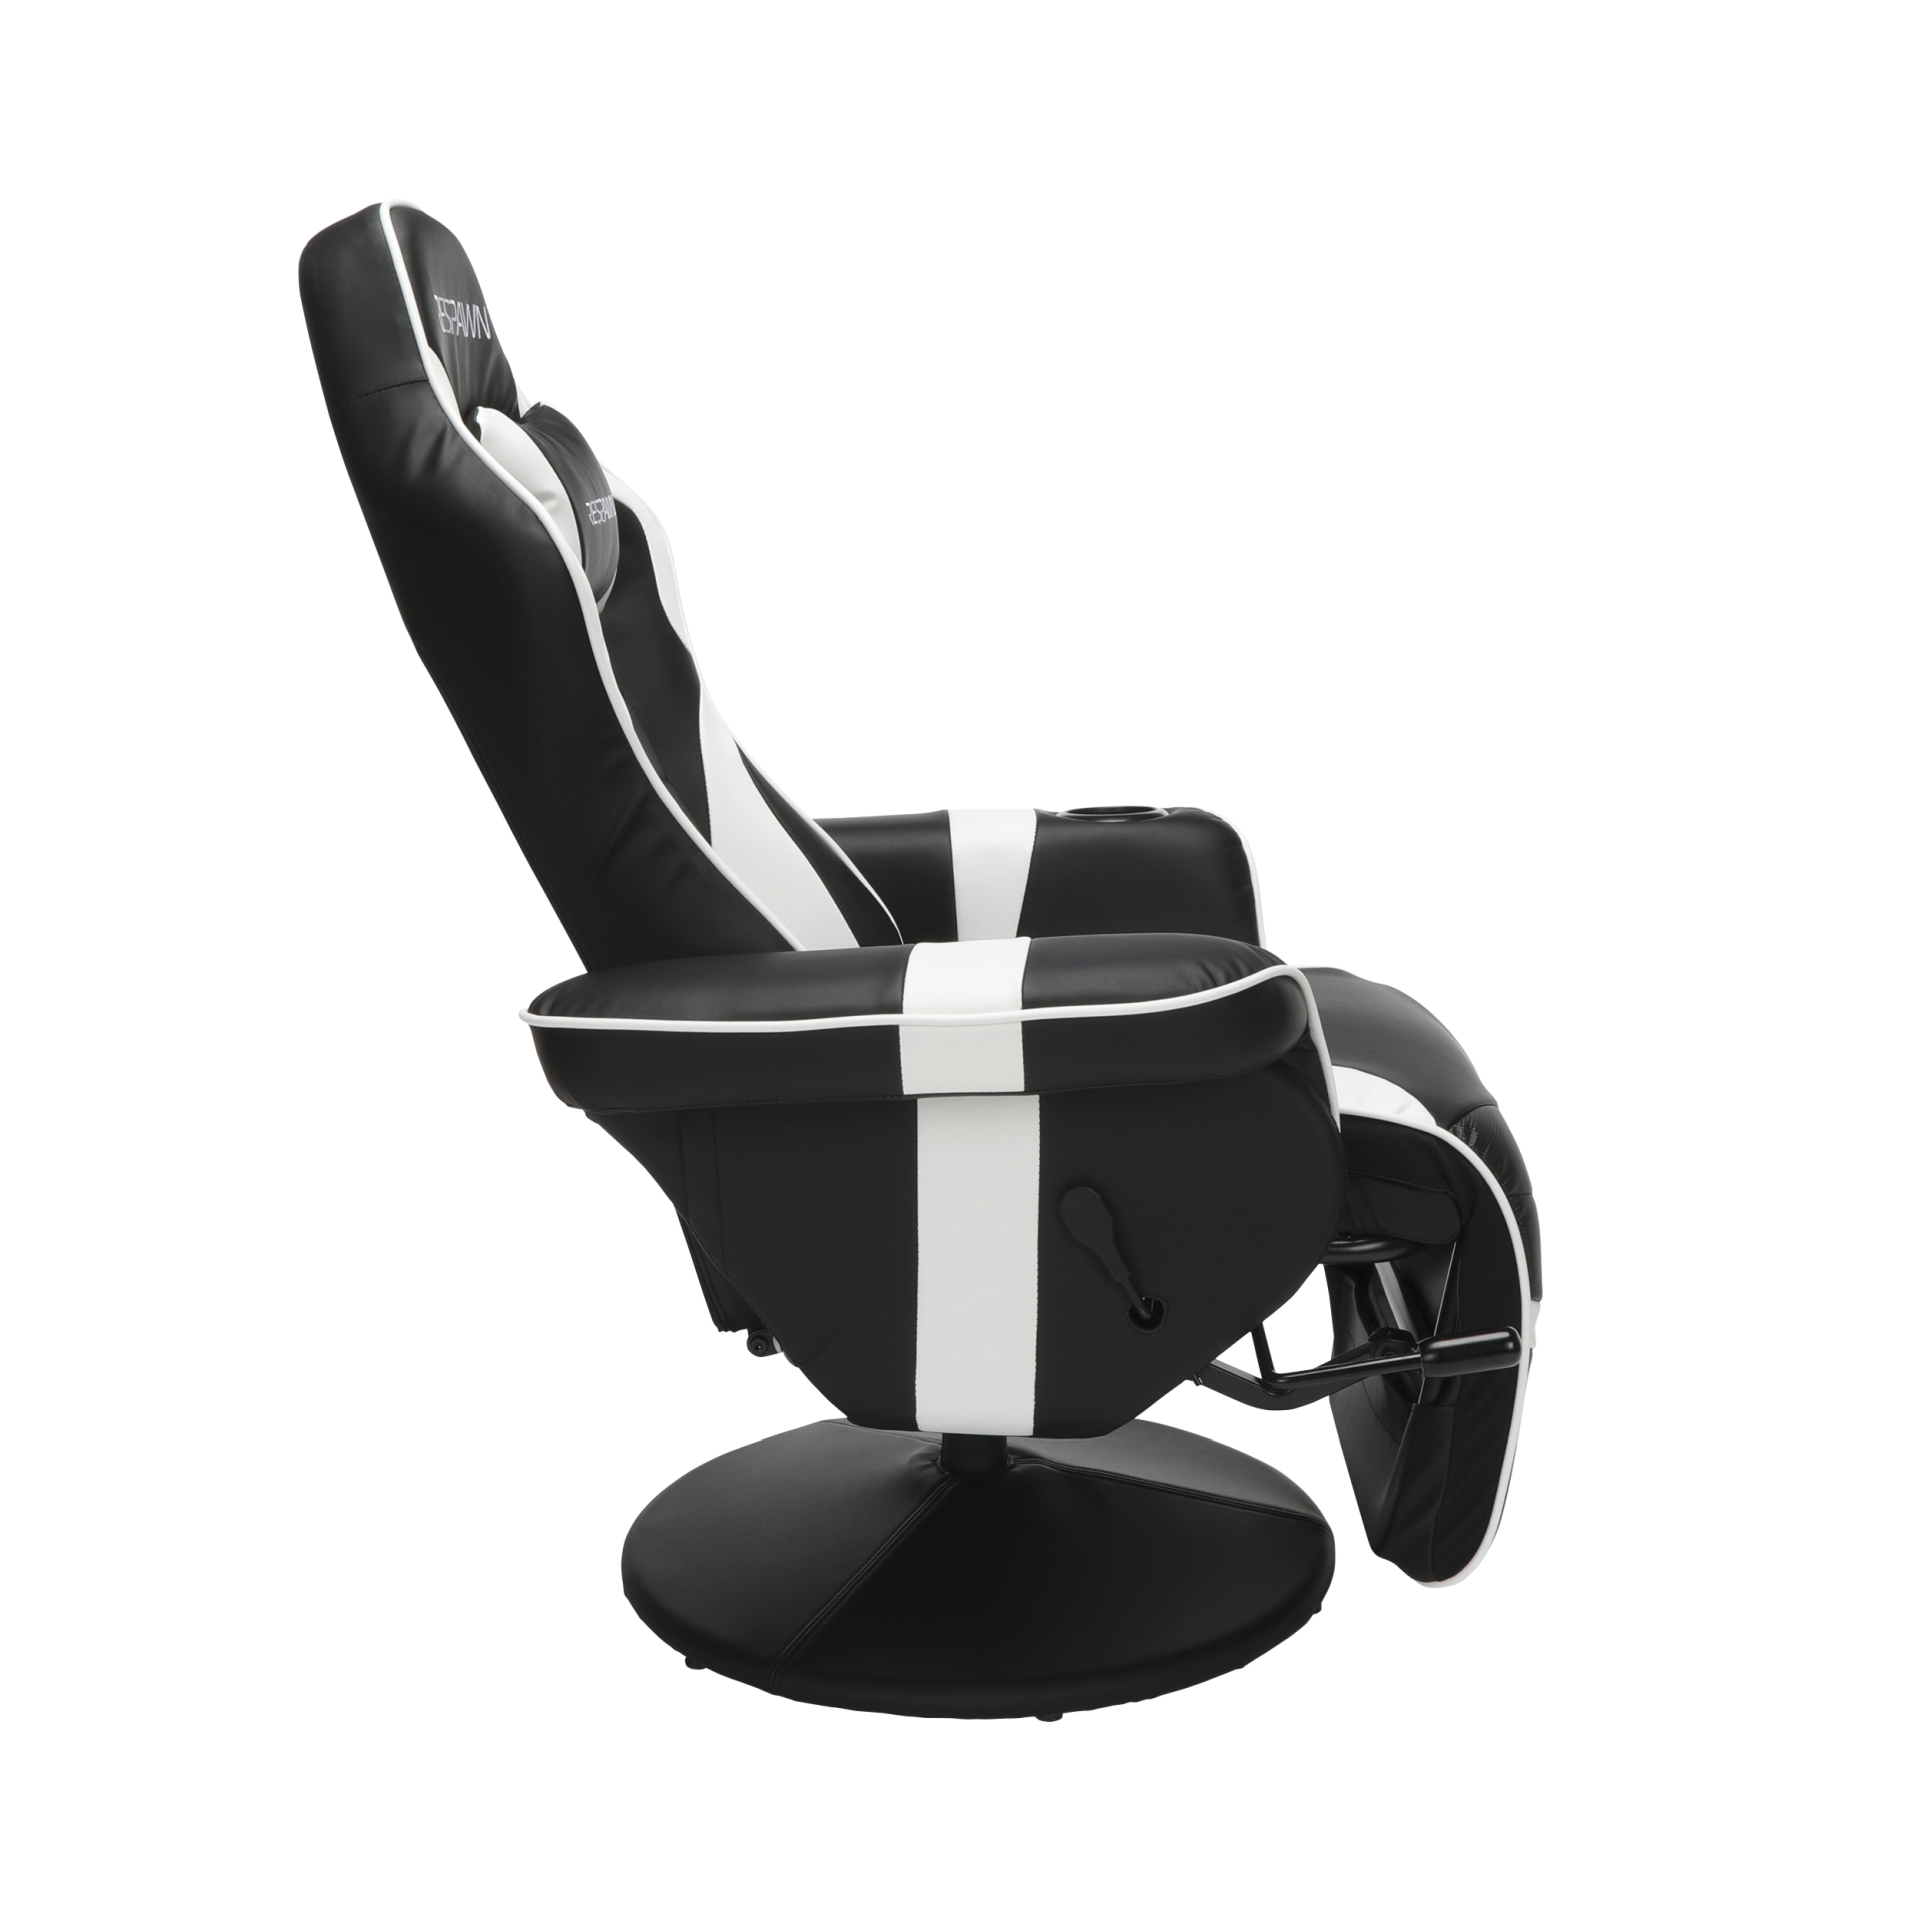 RESPAWN RSP-900 Gaming Recliner #37